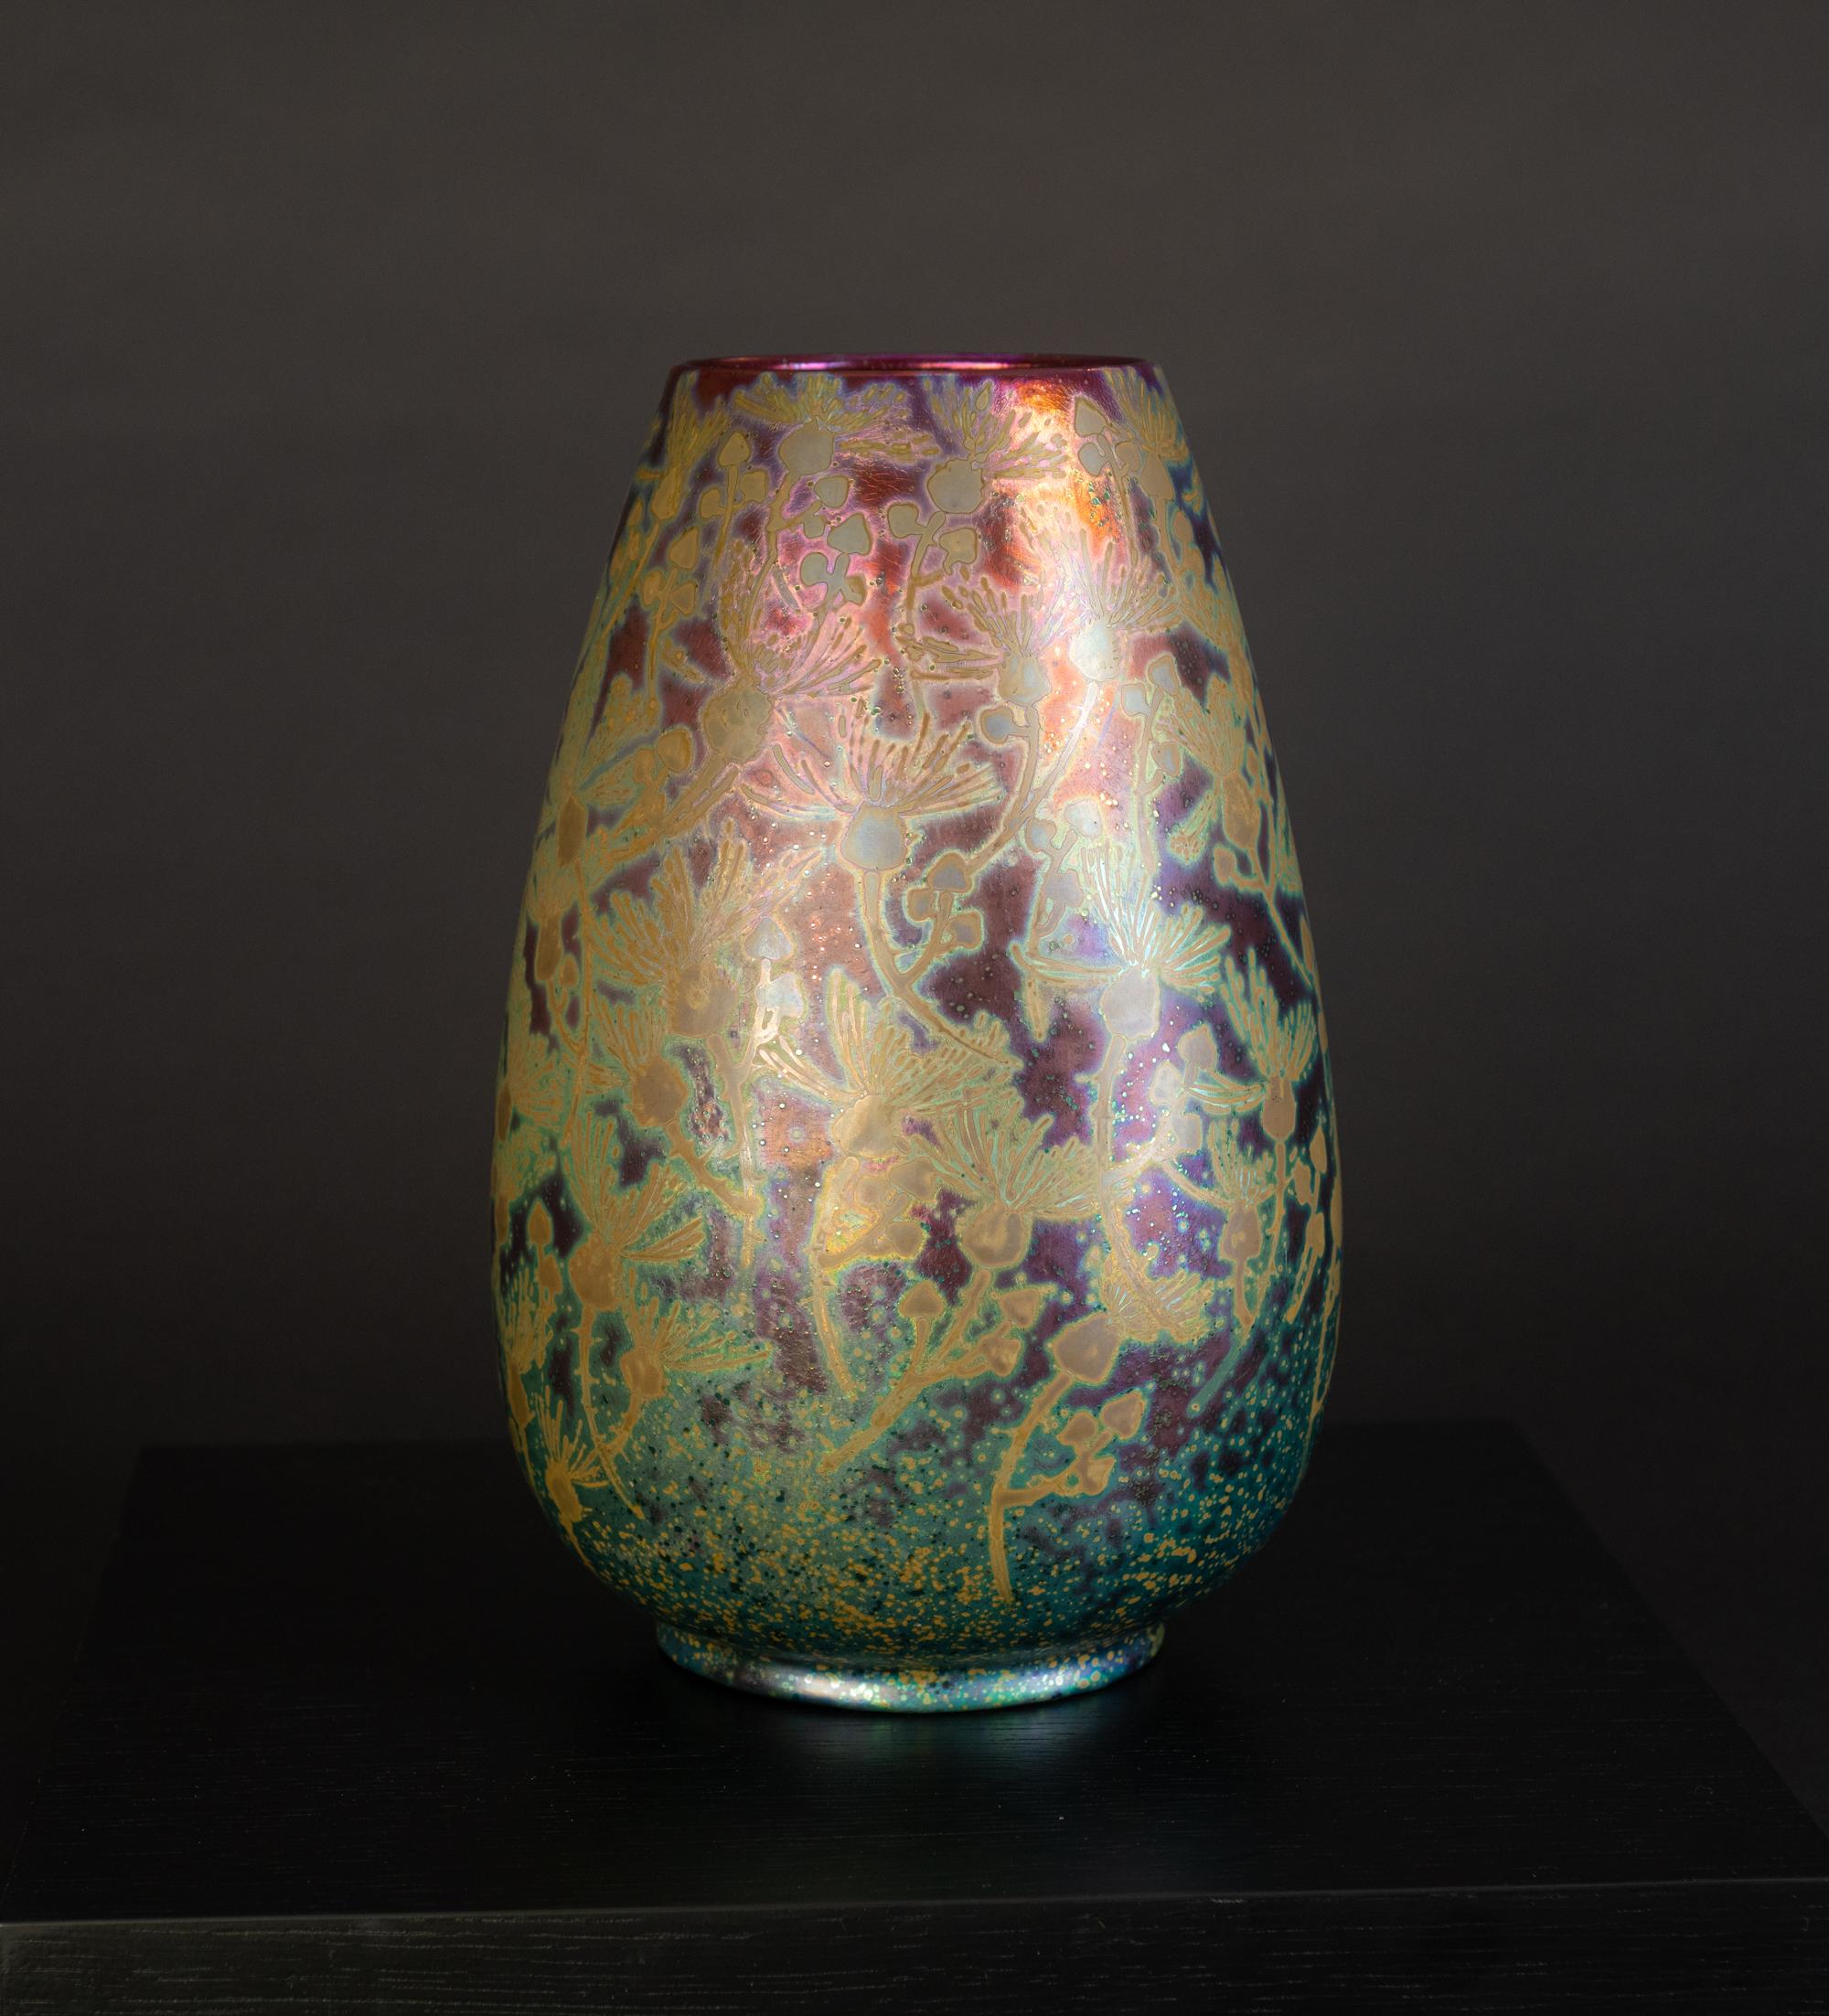 An encounter with Massier’s luster-glazed ceramics is an embarkation on an acid-colored trip, the sort of exploration which inspires deep reflection and requires transparency. Clement Massier, an accomplished ceramist born into a multi-generational